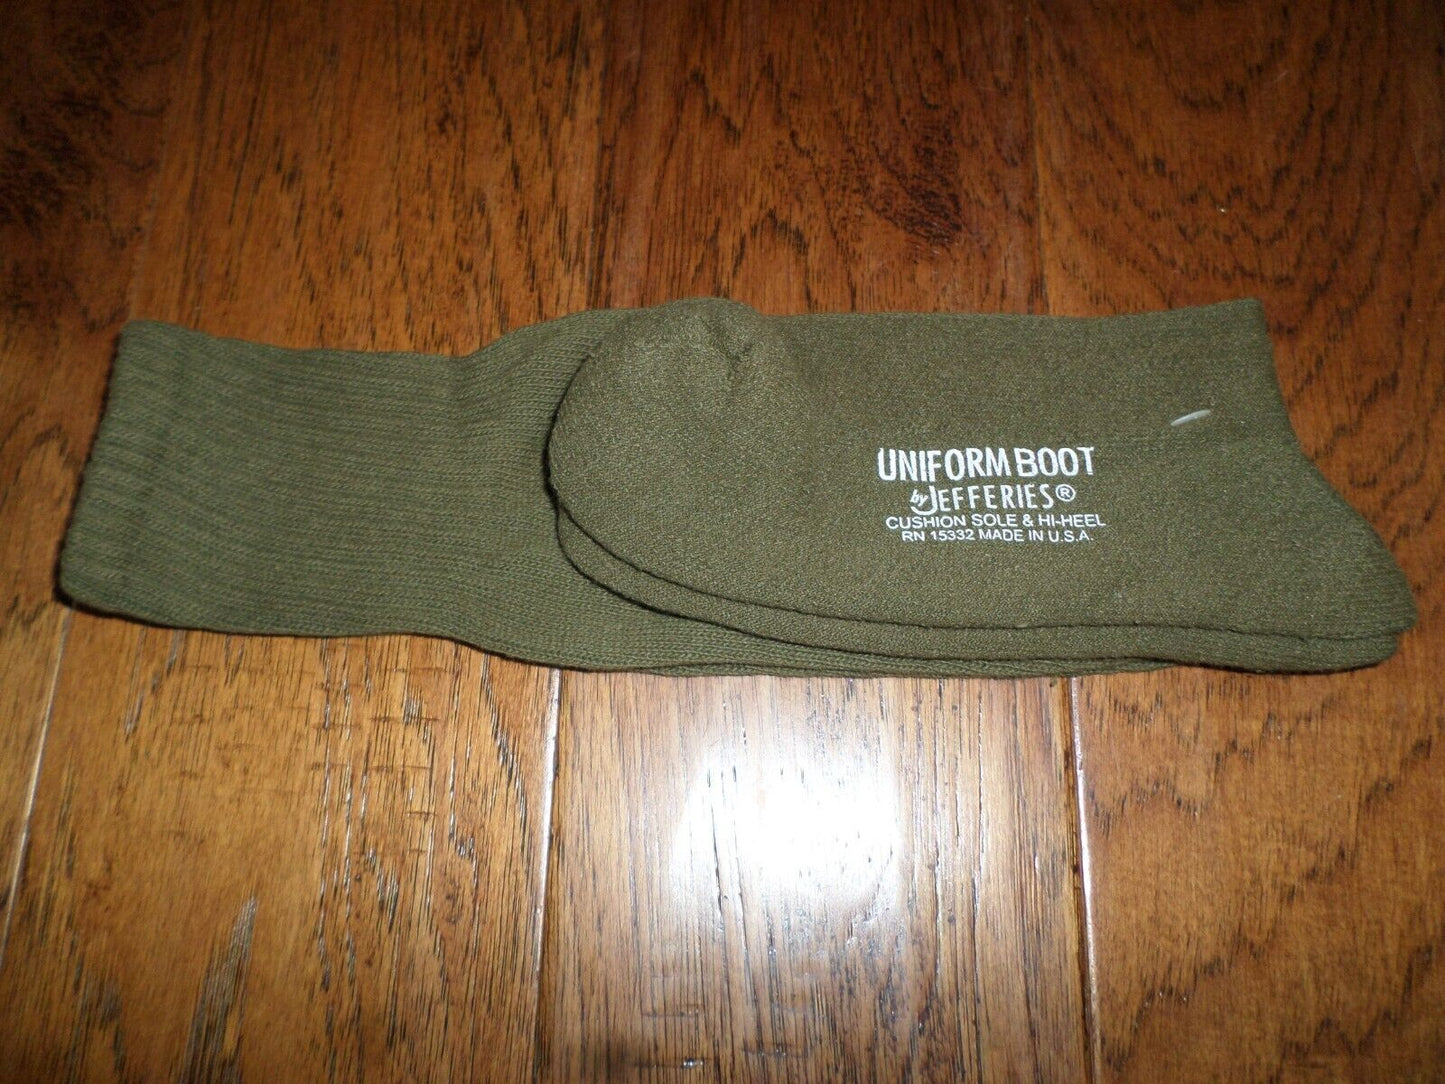 NEW MILITARY ISSUE CUSHION SOLE BOOT SOCKS U.S.A MADE OD GREEN LARGE 10-13